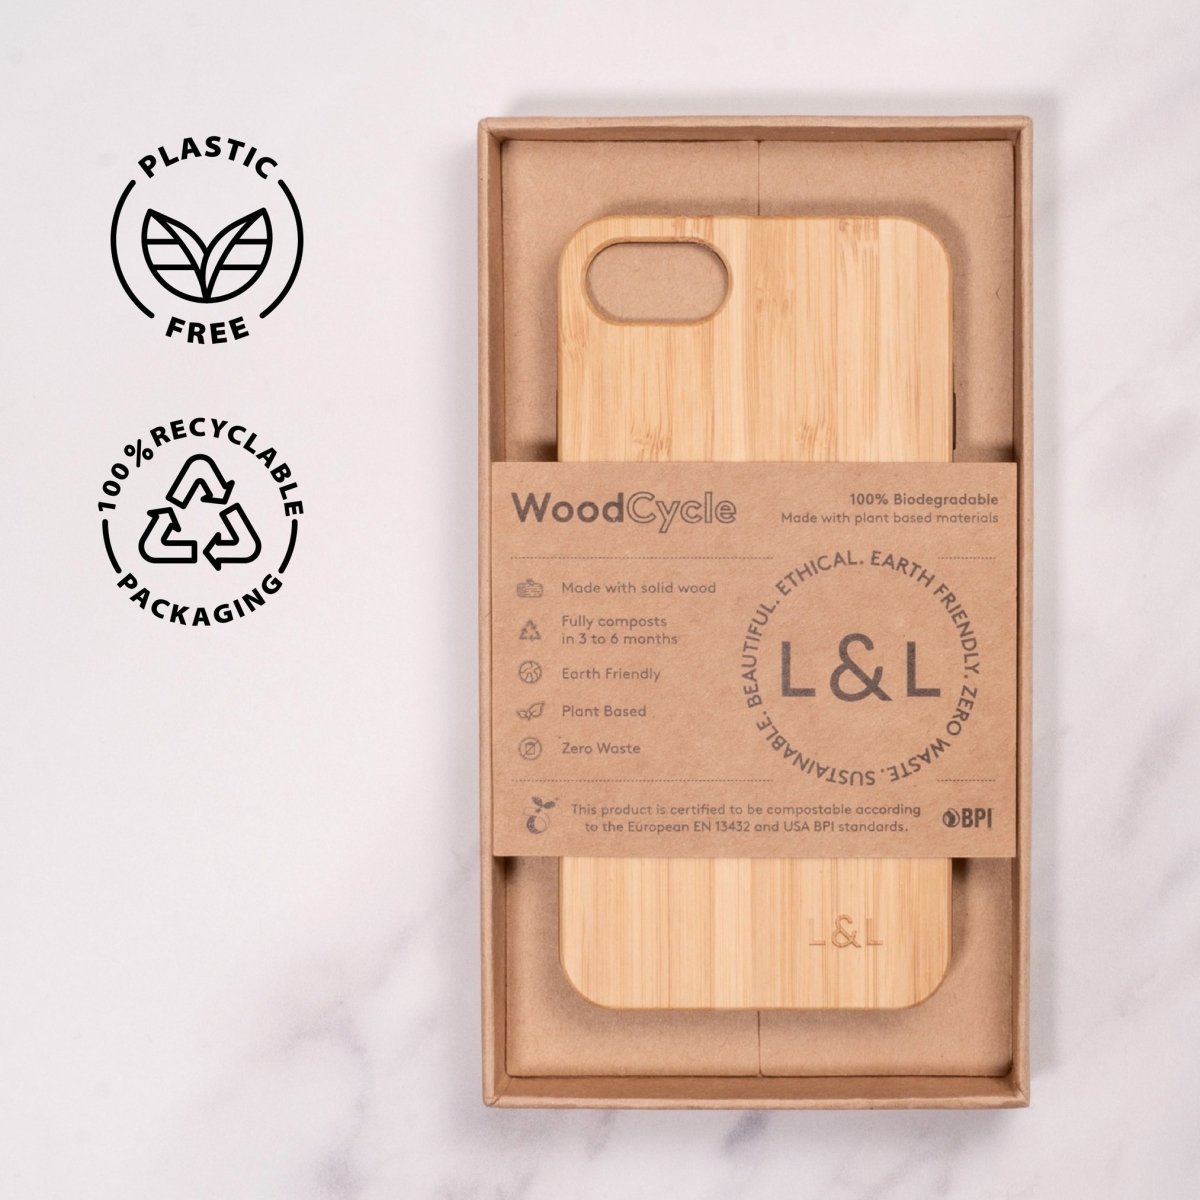 Bamboo iPhone SE 2020 Wood Phone Case with Eco-Friendly Shell - Also fits iPhone 6, iPhone 7, iPhone 8 - Loam & Lore